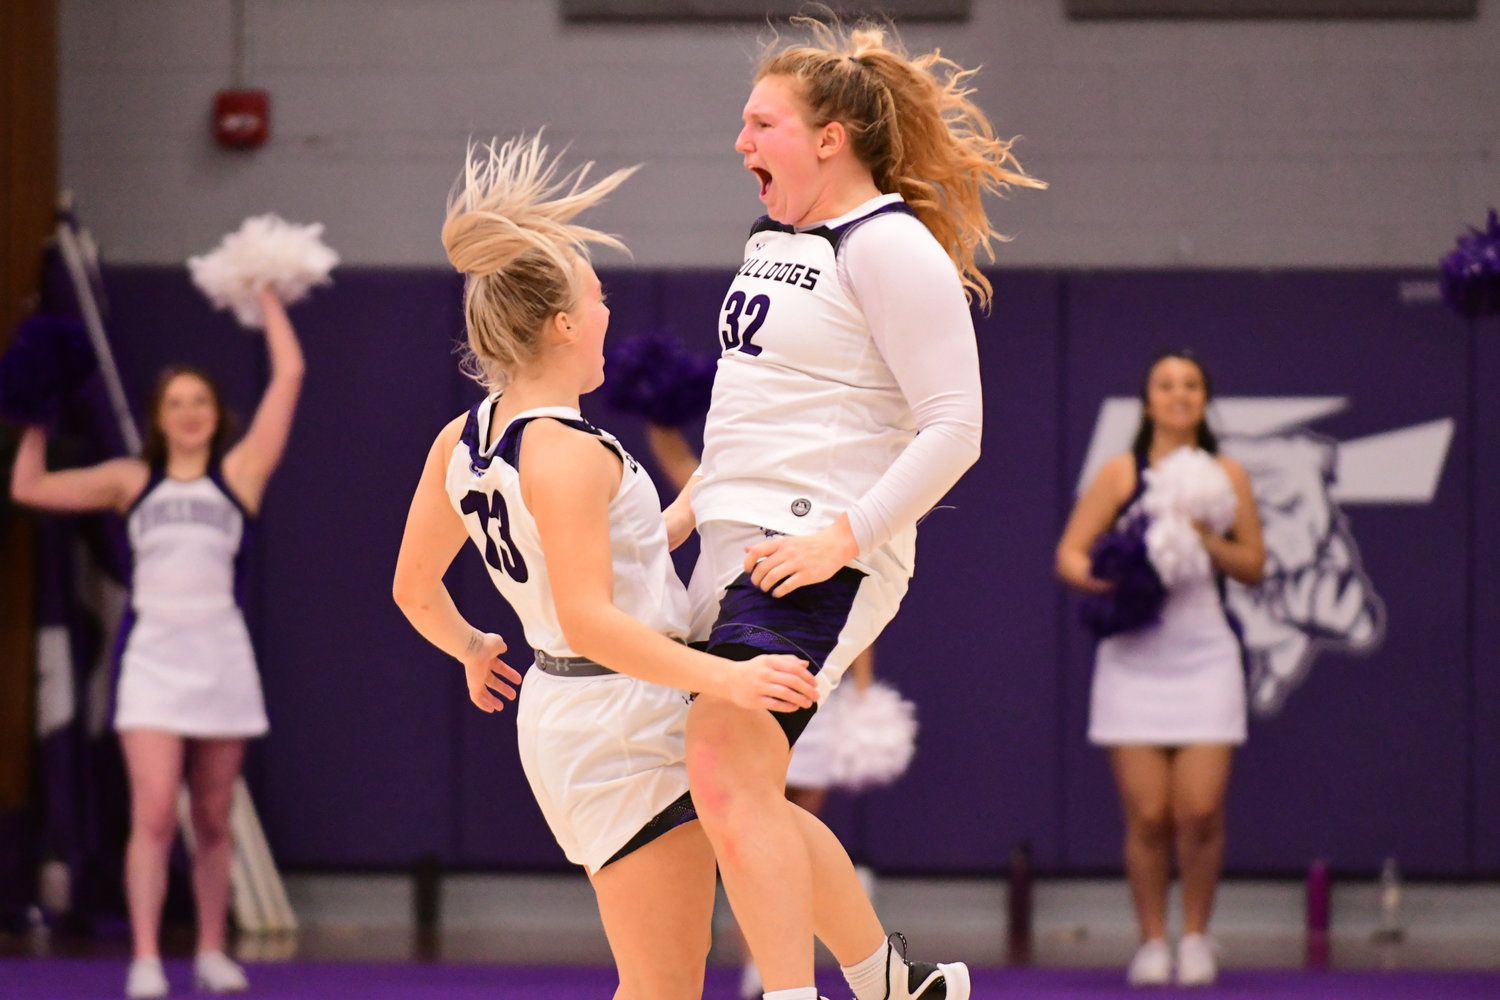 Truman's Ellie Weltha and Hannah Belanger celebrate after a 67-66 win over Drury, the first in Bulldog history.